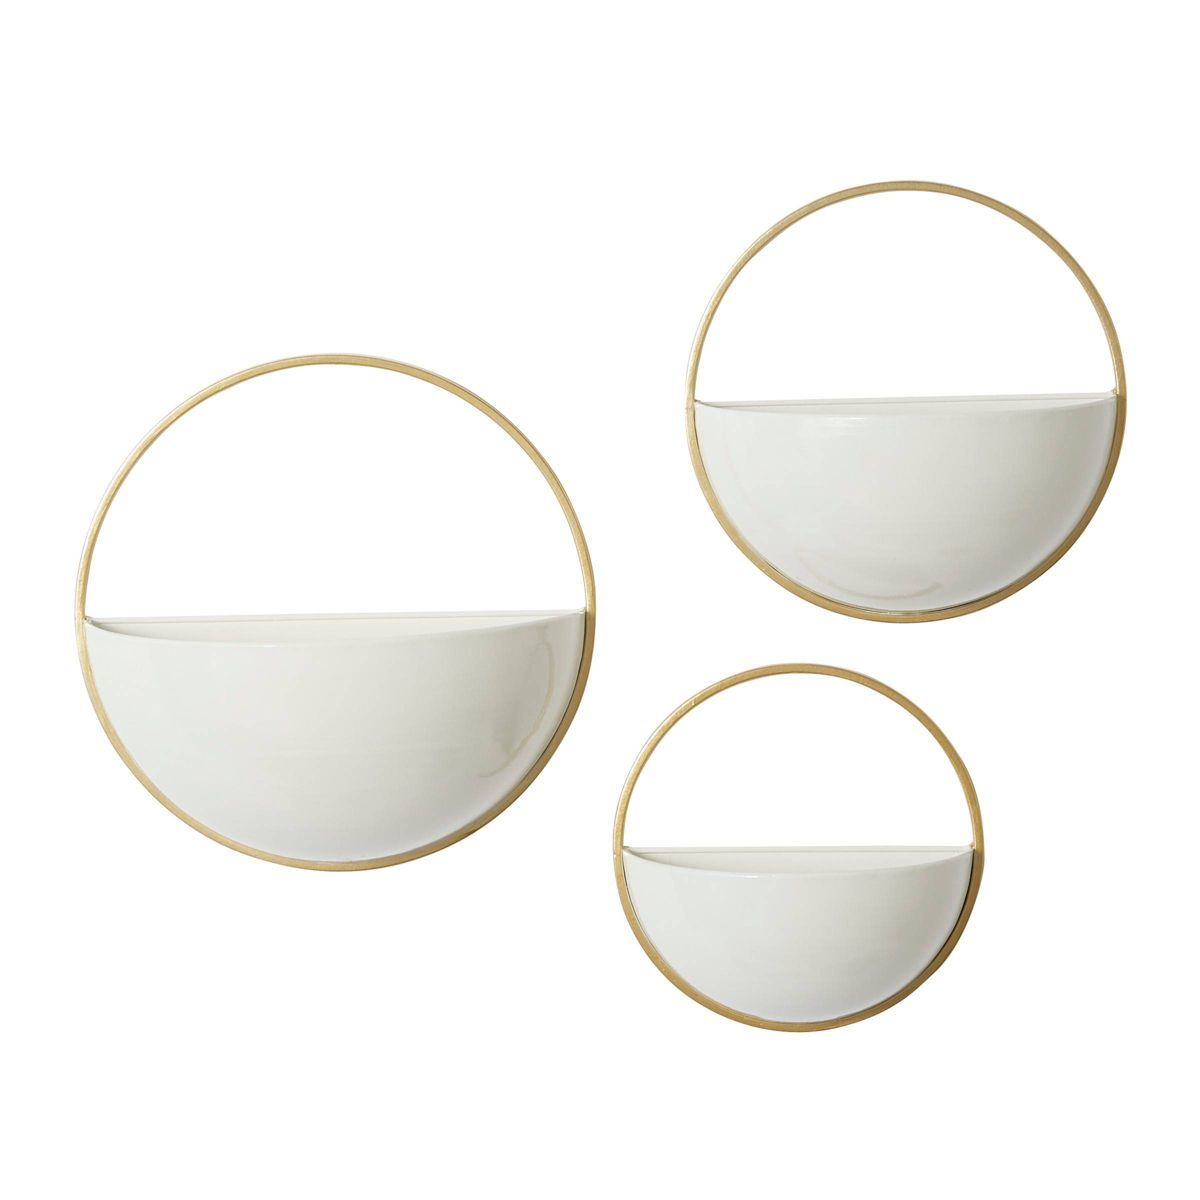 Set of 3 Metal Wall Planters White/Gold - Olivia & May | Target